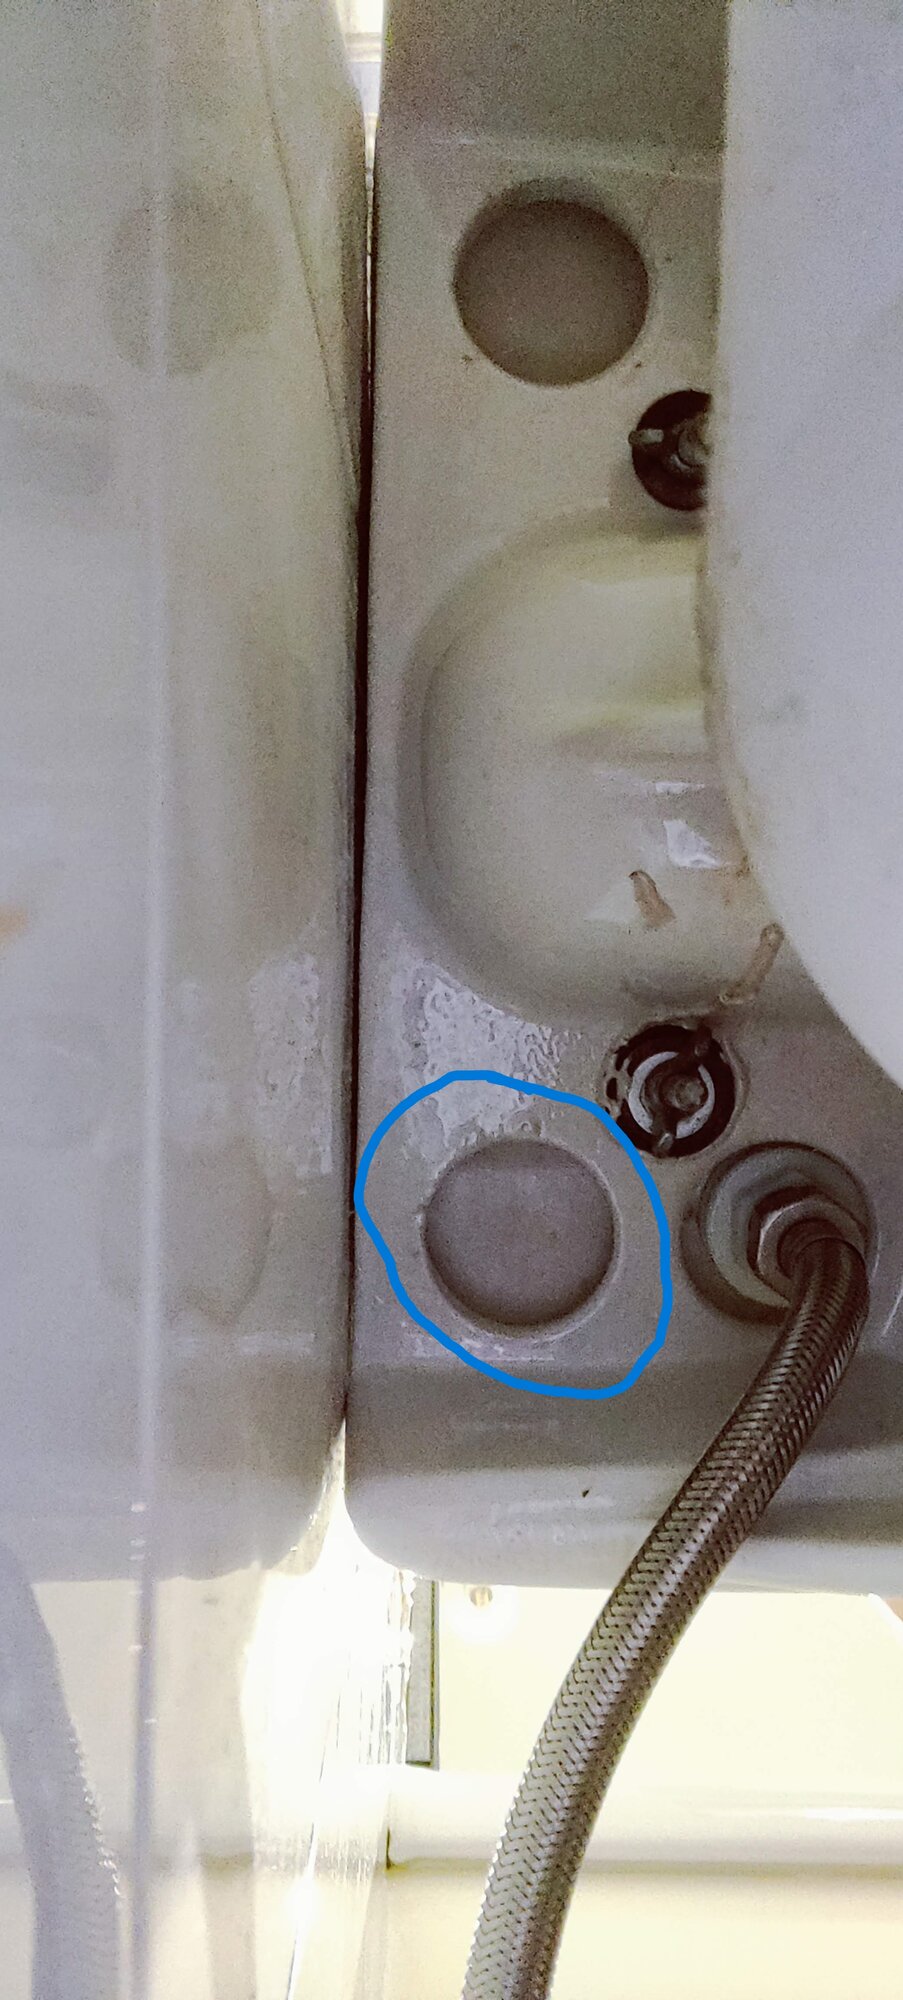 Blue circle shows where the water is leaking from